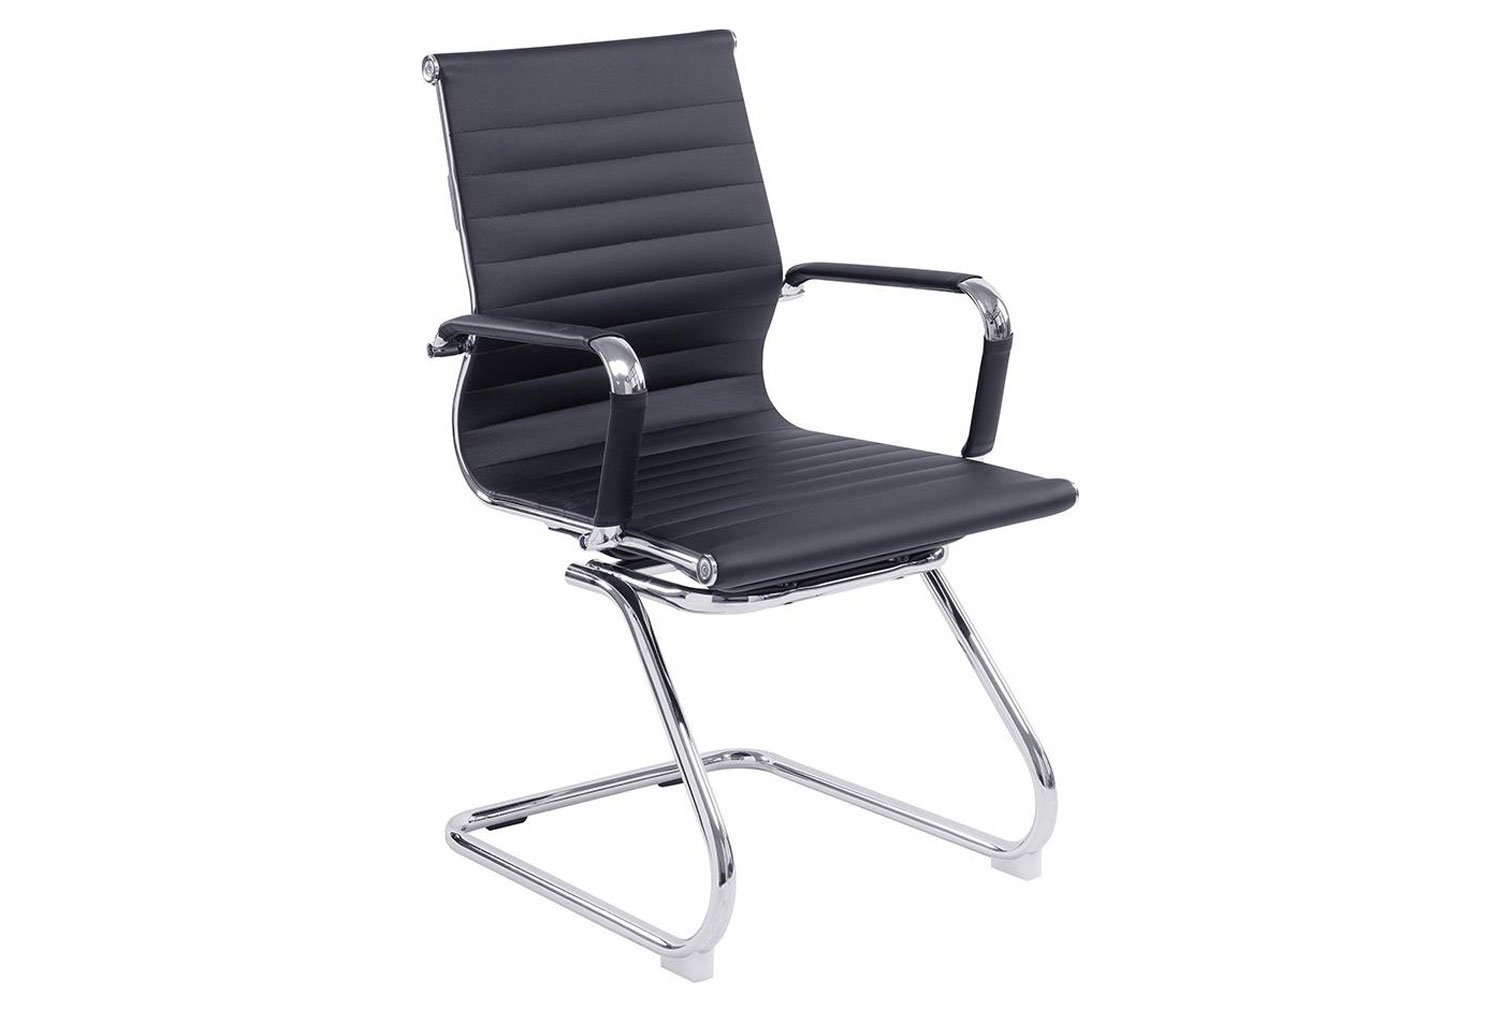 Andruzzi Black Bonded Leather Visitor Office Chair, Black, Fully Installed